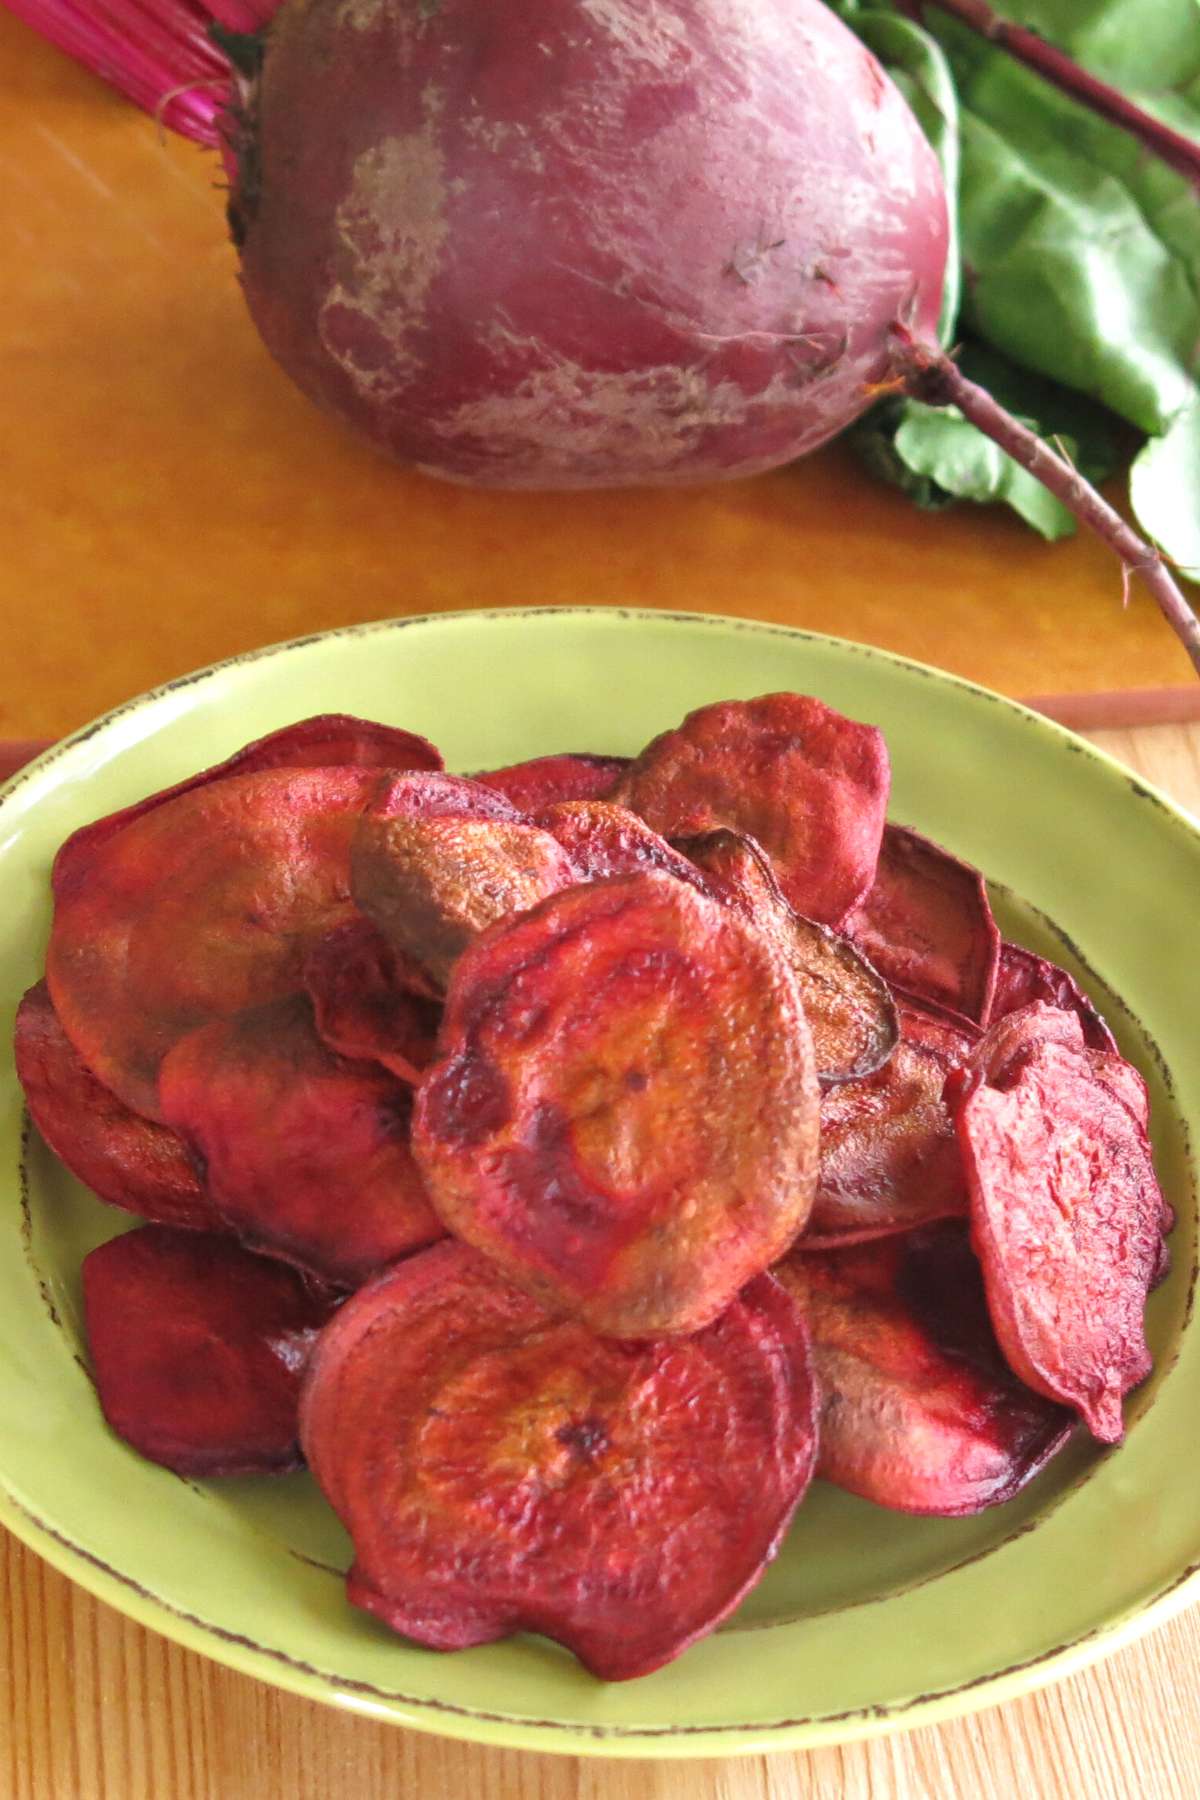 Homemade baked beet chips piled on a plate with a raw beet behind them on a cutting board.